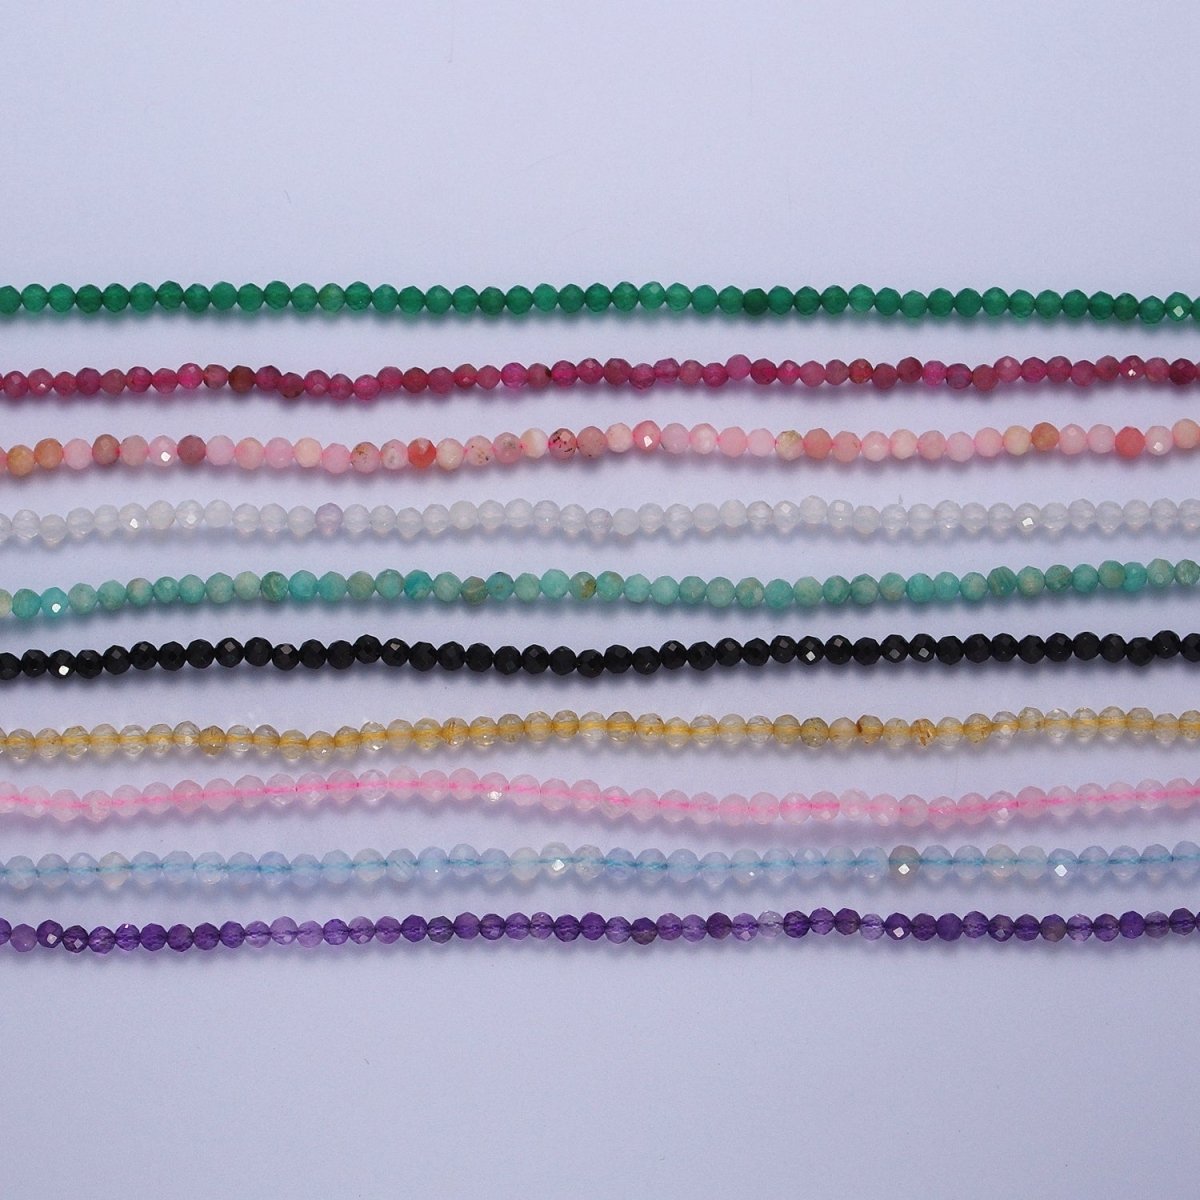 16 Inch Multifaceted 2.8mm Matte Gemstone Bead Necklace | WA-1469 - WA-1478 Clearance Pricing - DLUXCA